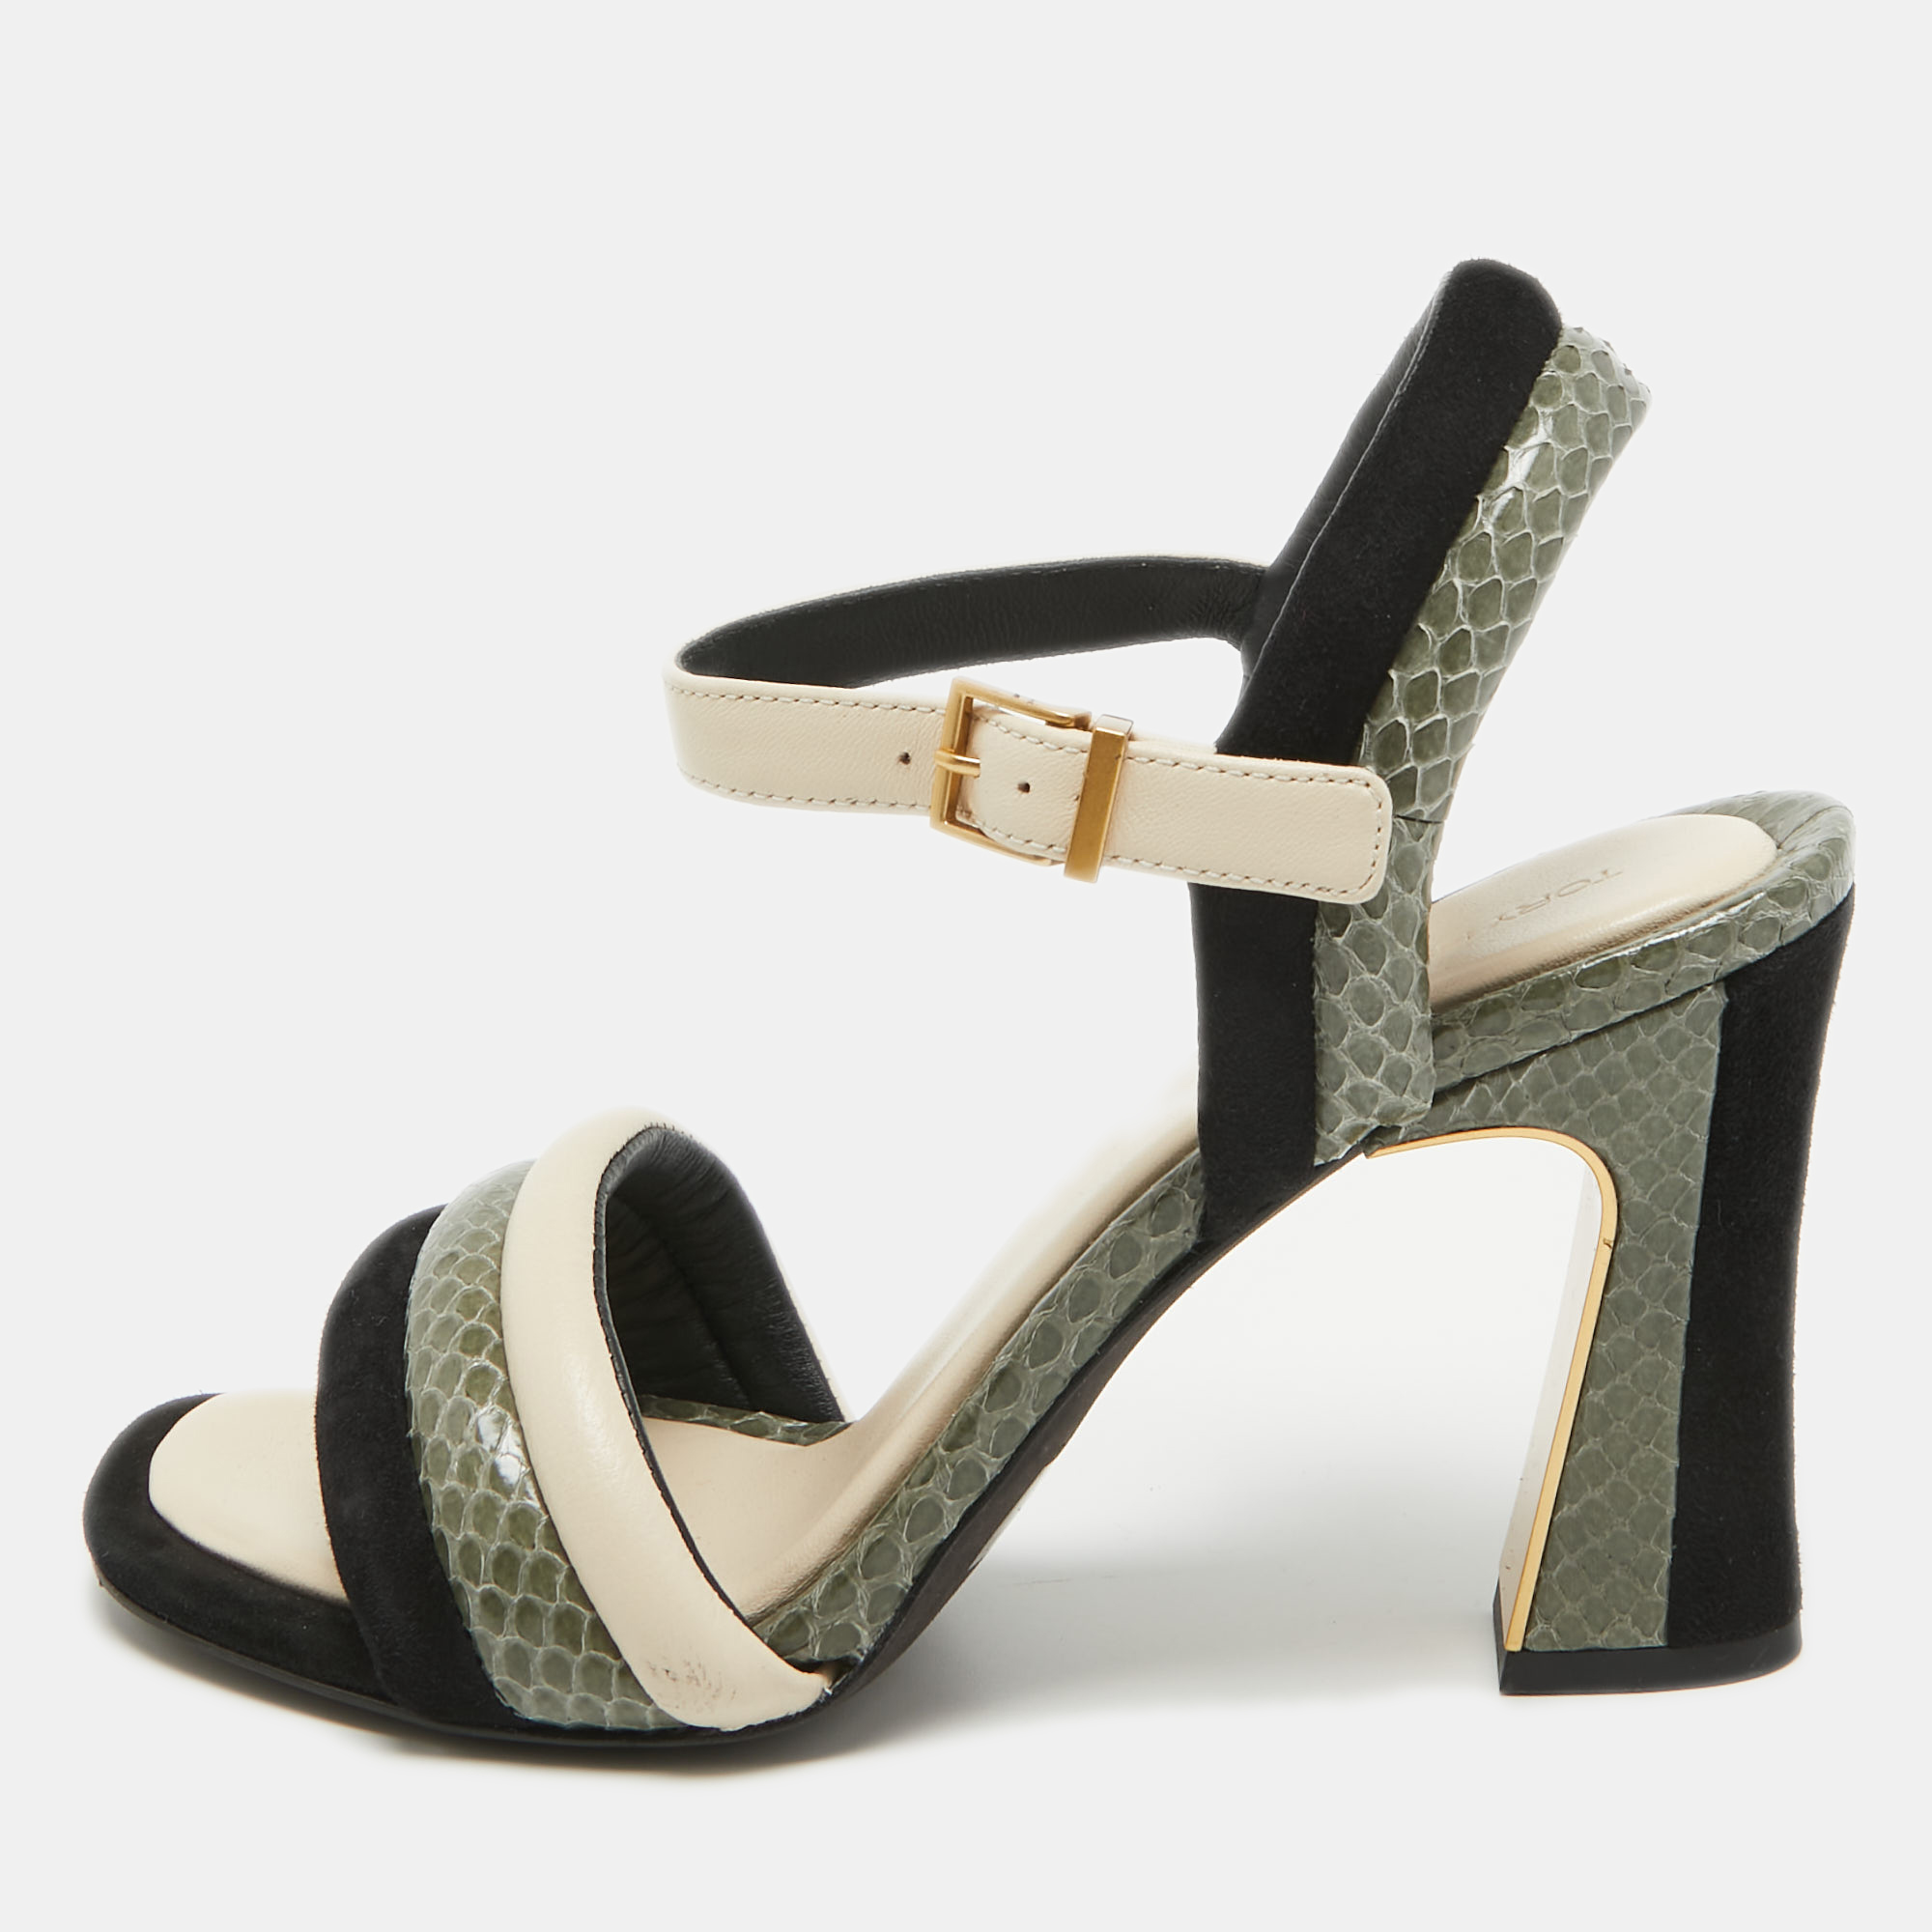 

Tory Burch Tricolor Suede and Embossed Snakeskin Puffed Up Sandals Size 37.5, Black